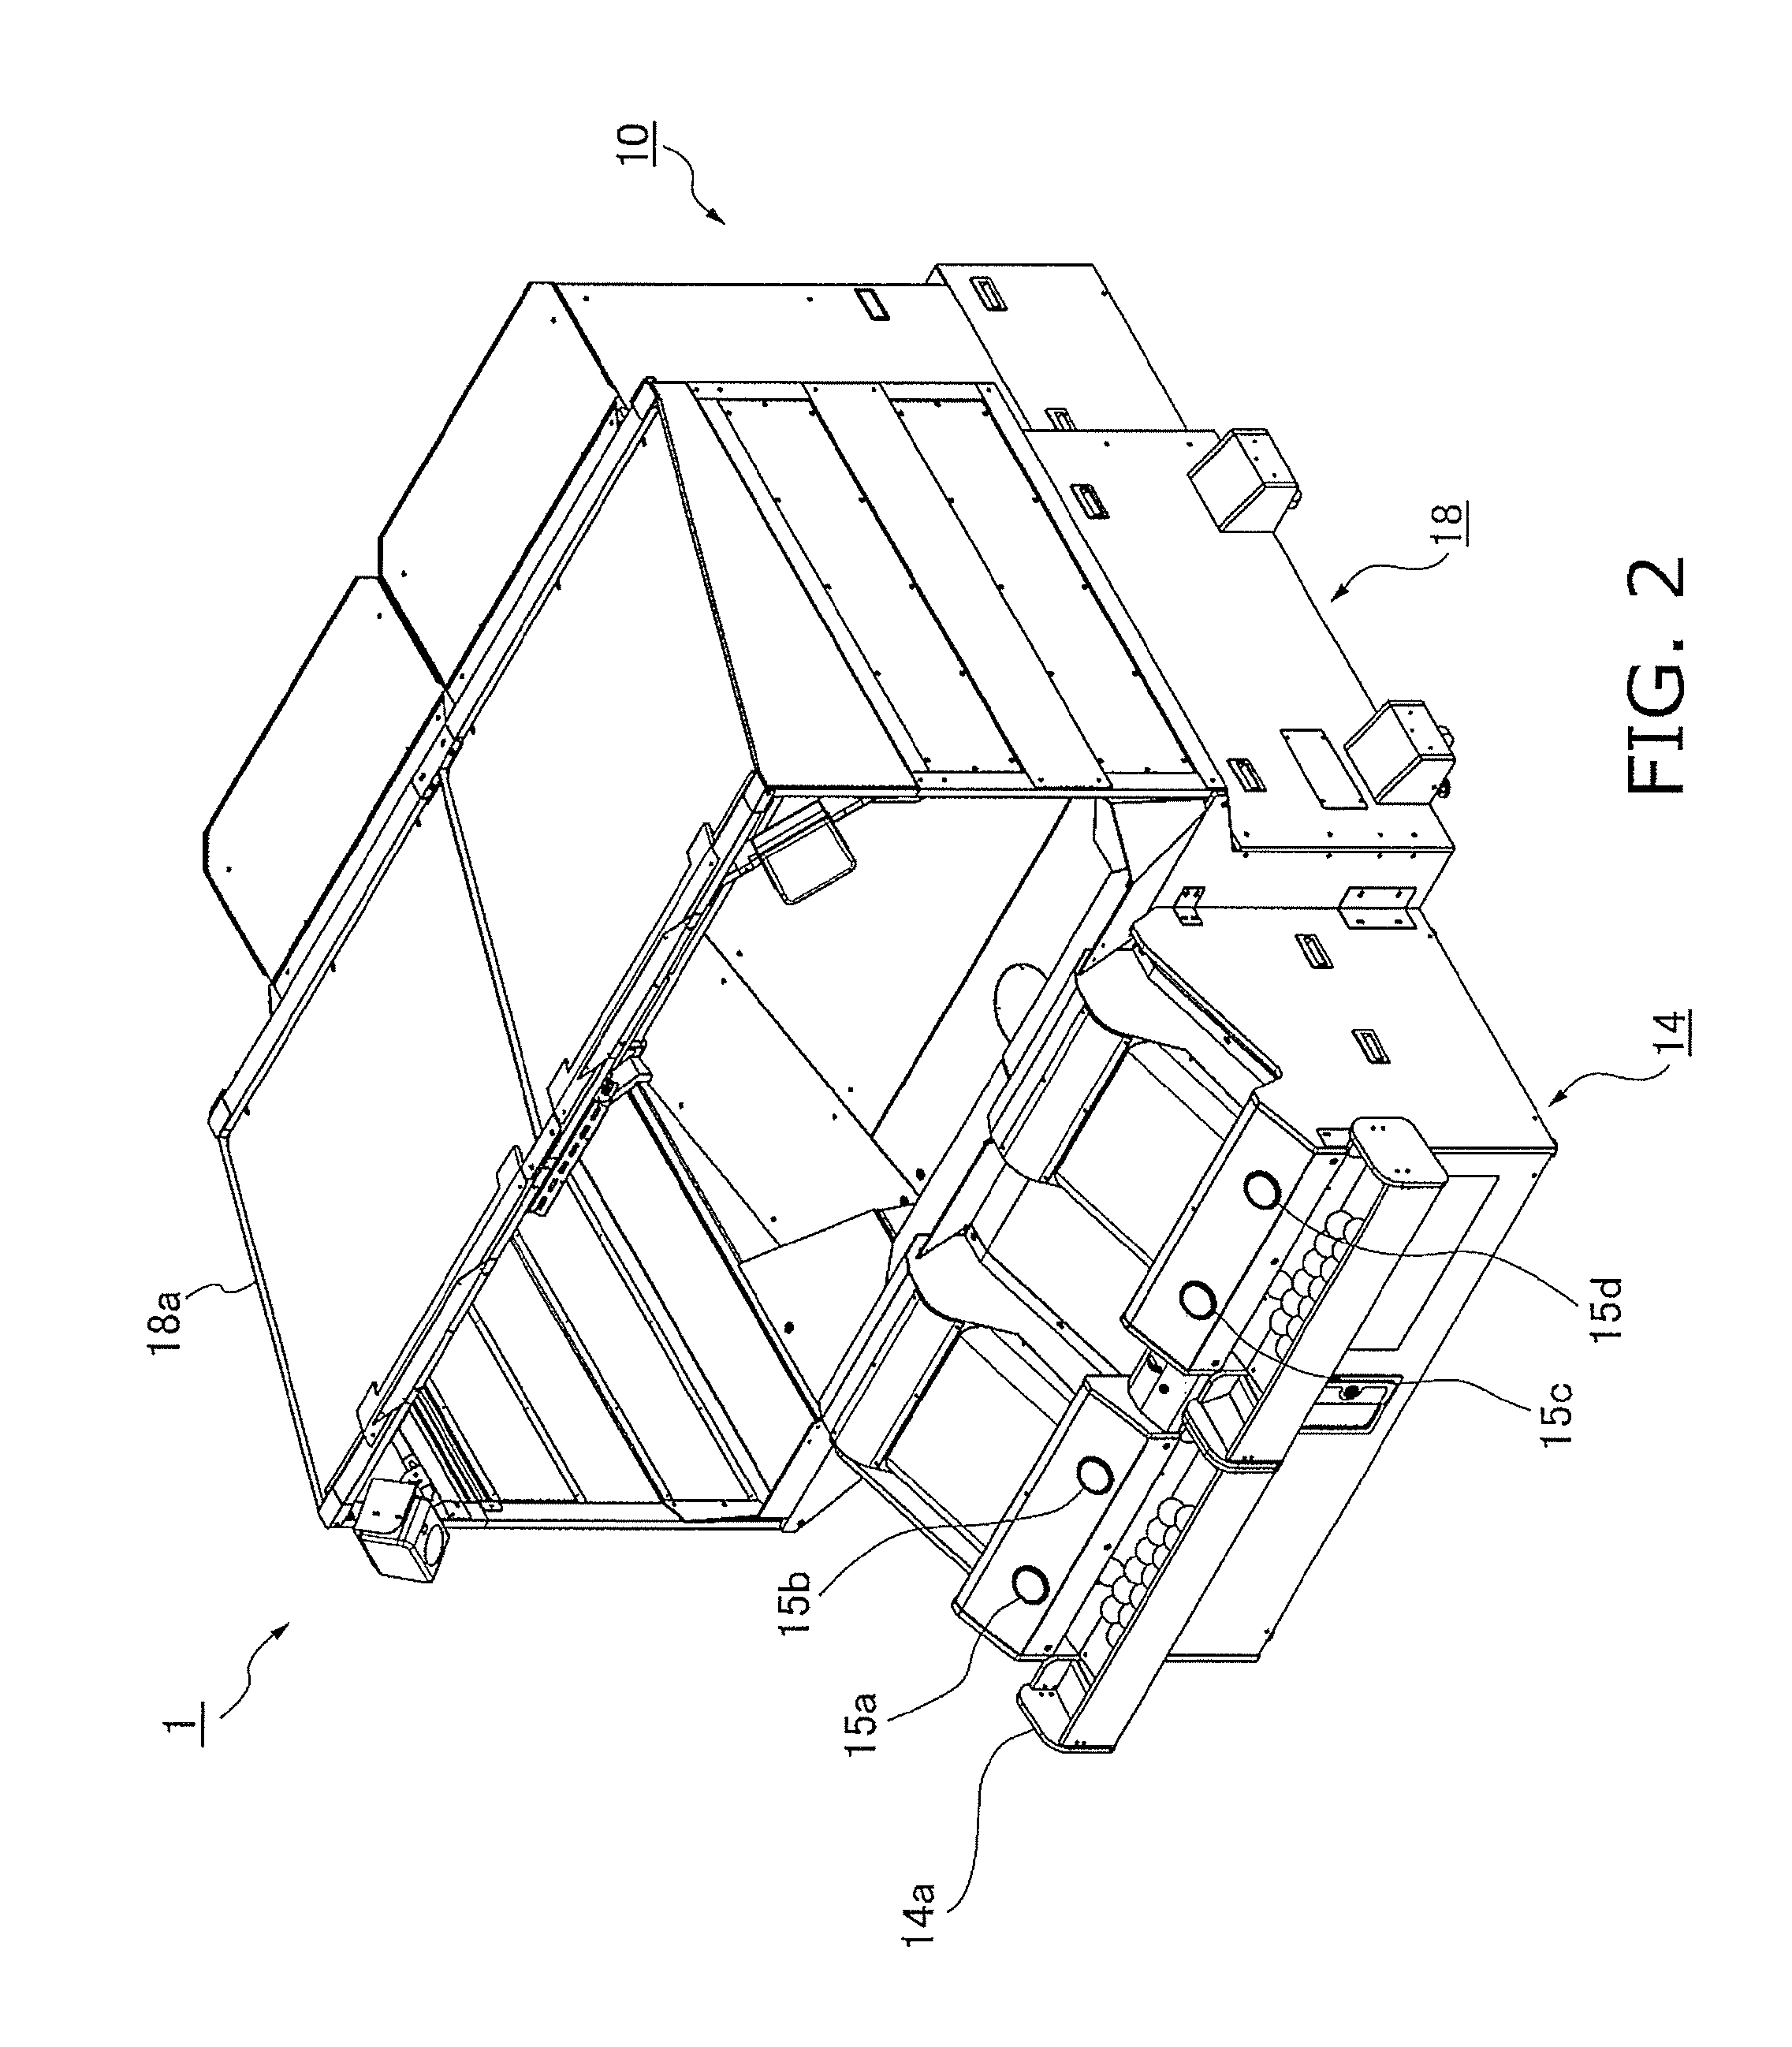 Game device with cheating prevention function, and method and program for preventing cheating during a game